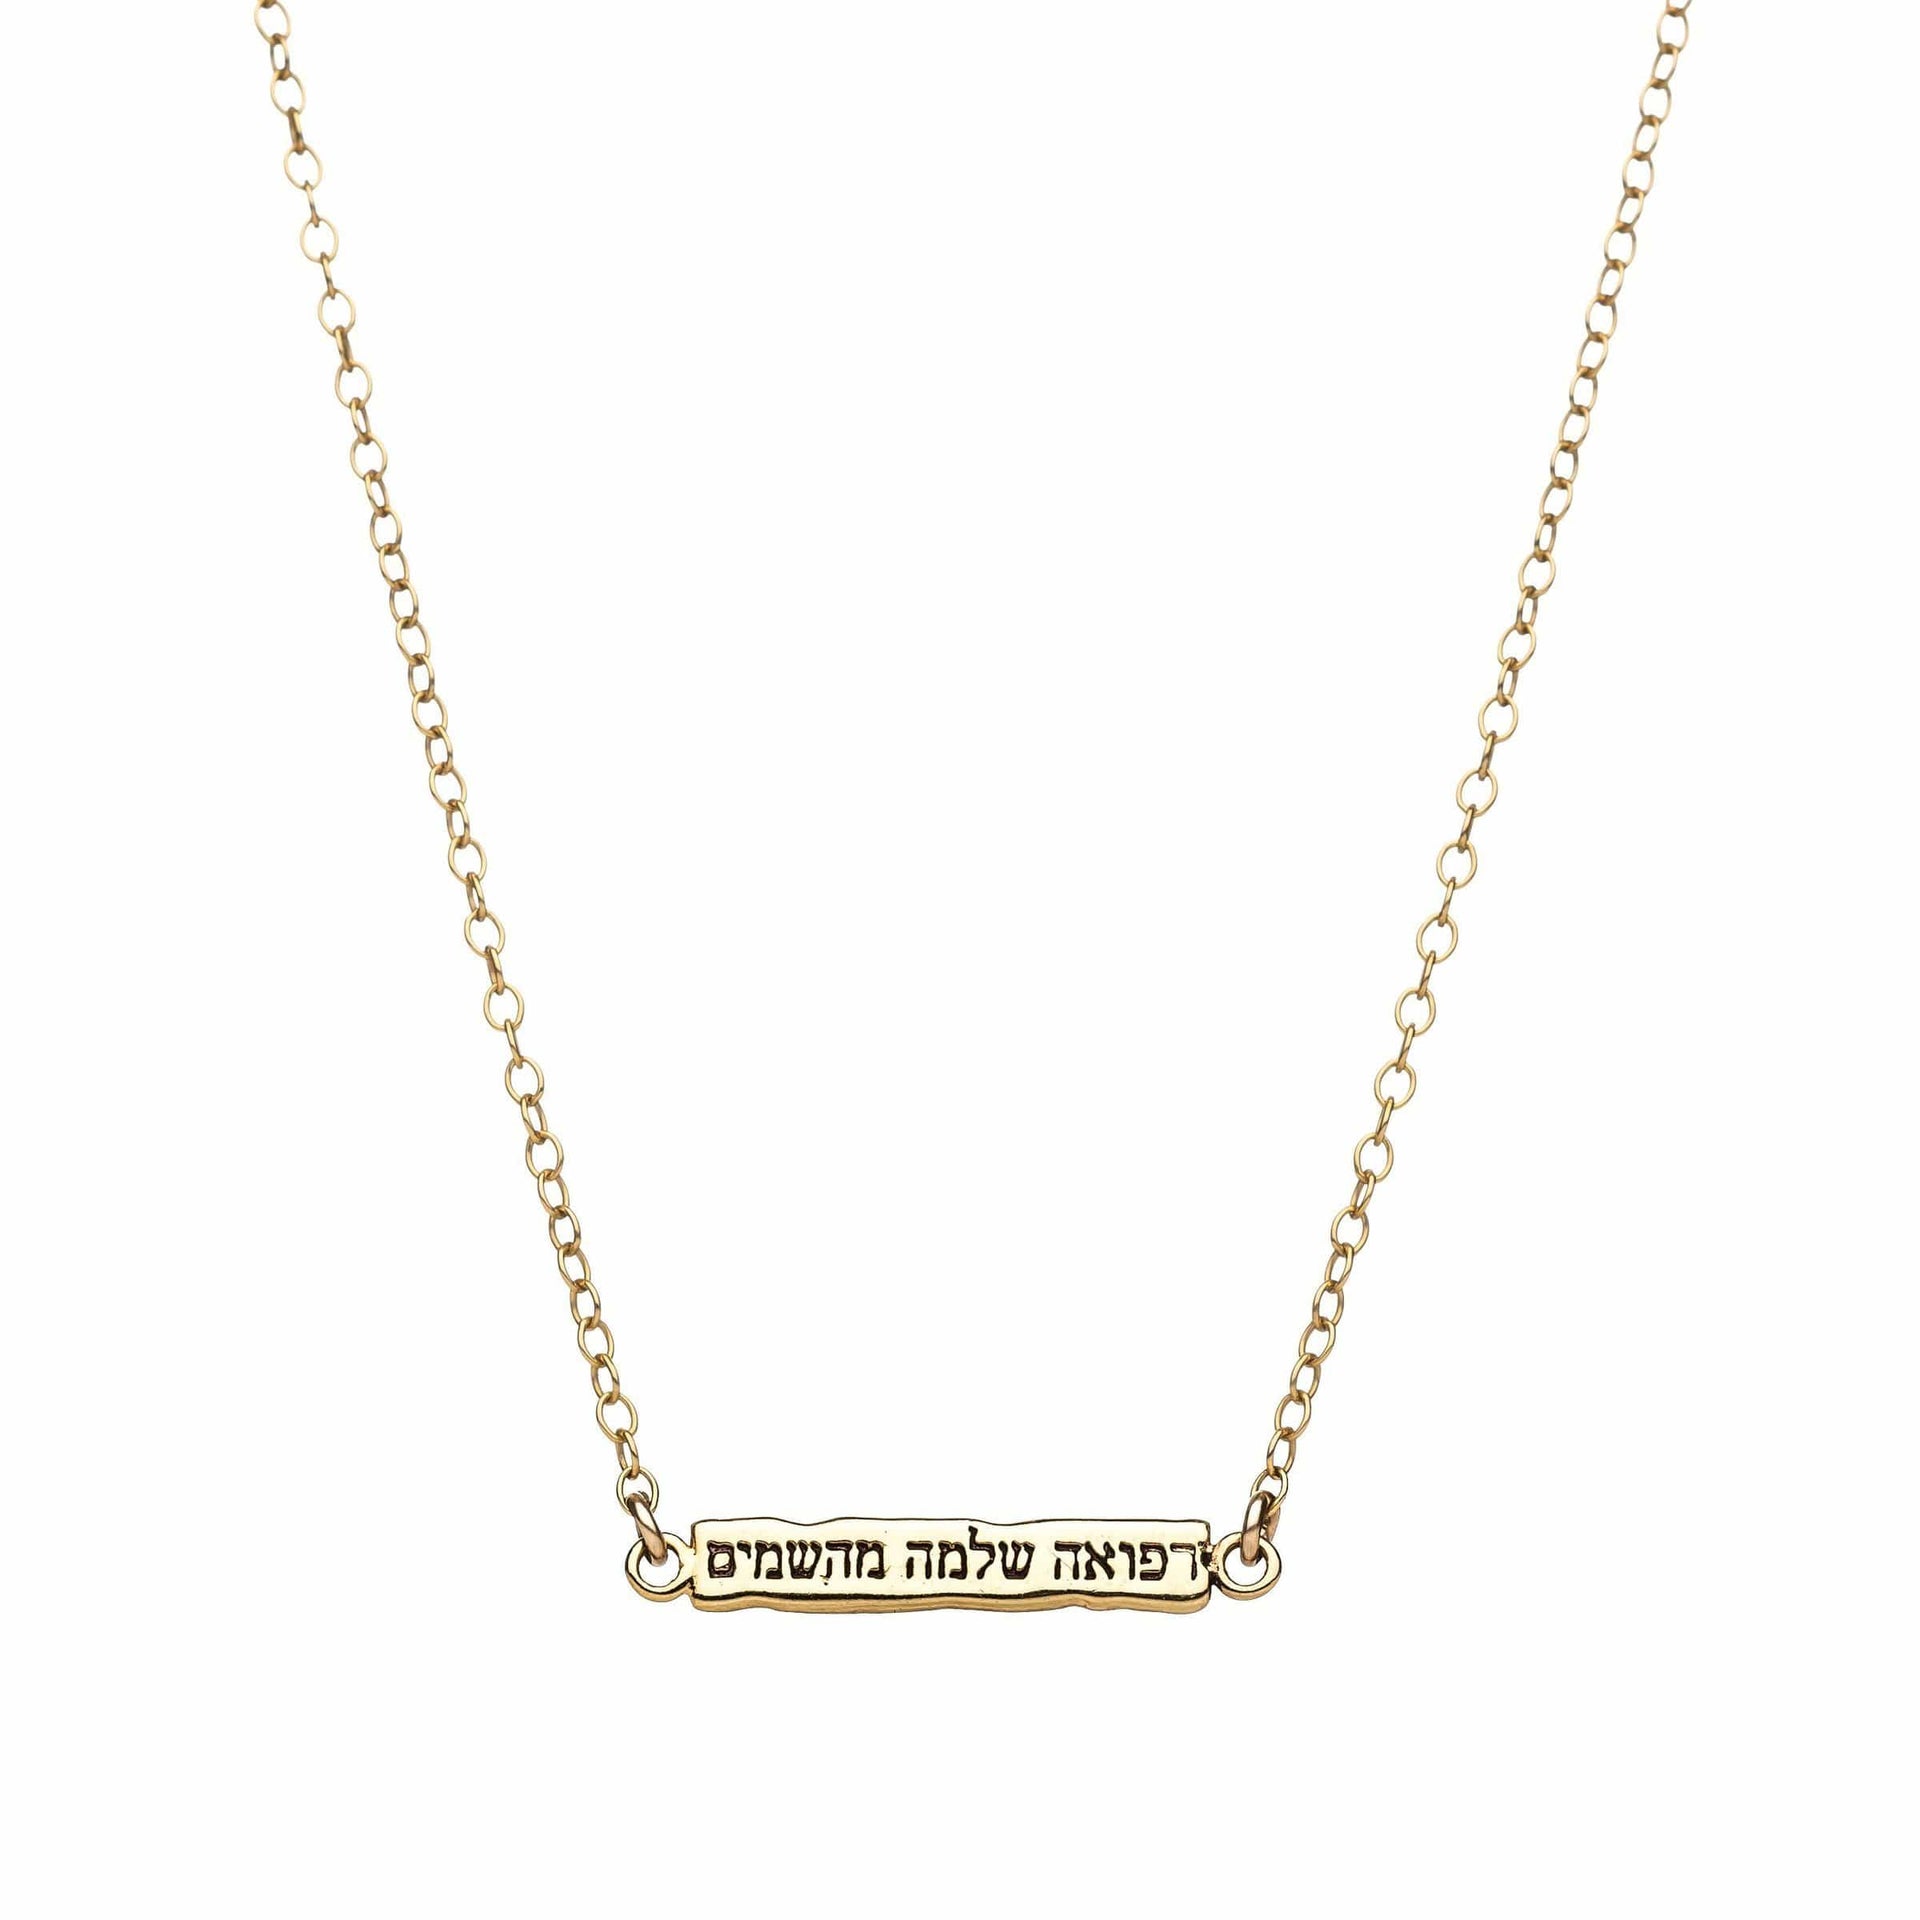 Alef Bet Necklaces Gold Hebrew Complete Healing Refuah Shlema Necklace - Silver or Gold